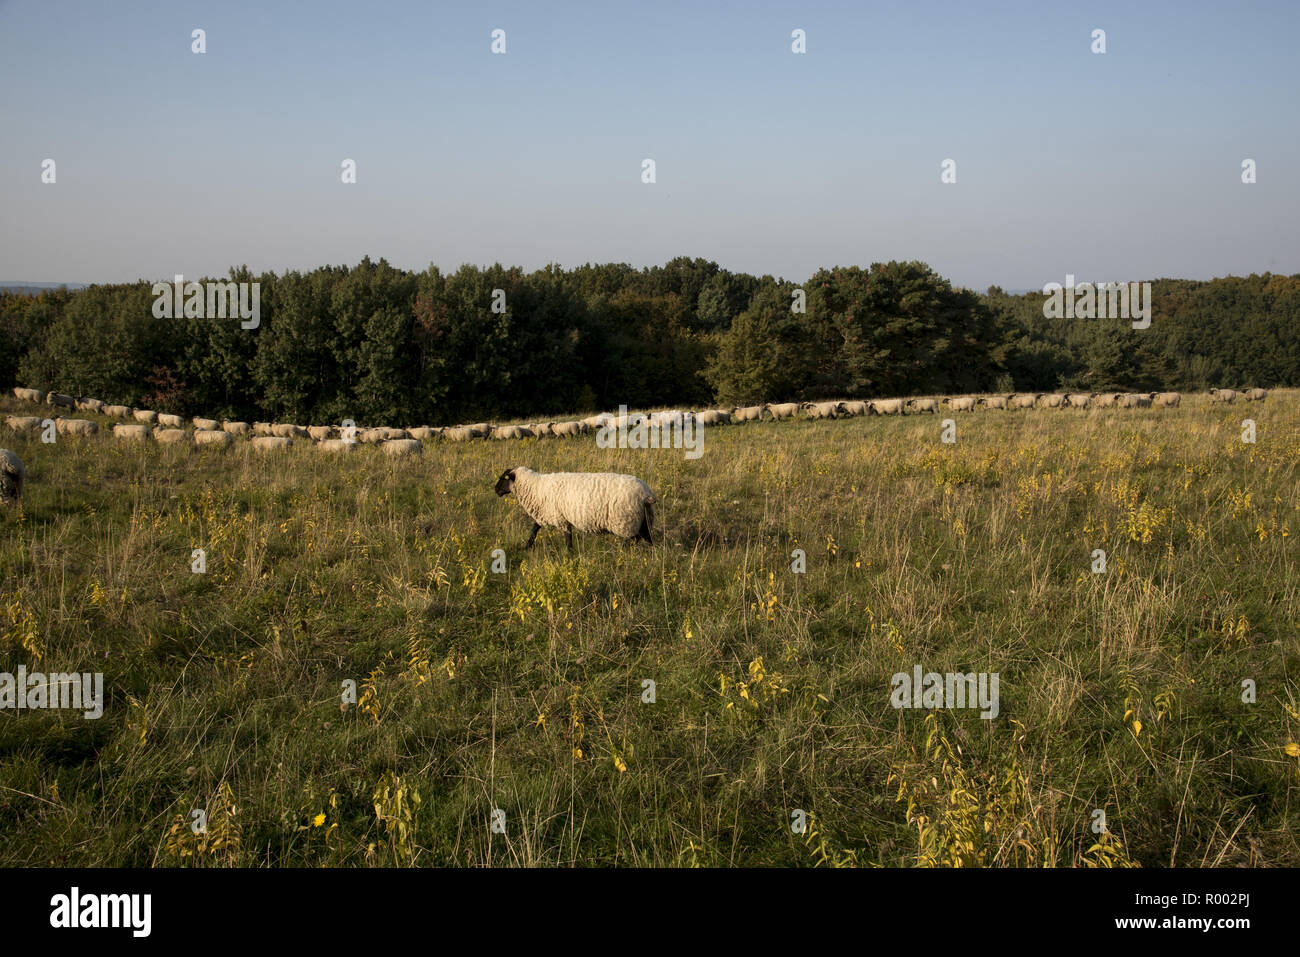 Sheep grazing in the meadows in a hilly landscape called Zickersche Berge on Mönchgut peninsula in Southeast Rügen Island. Stock Photo